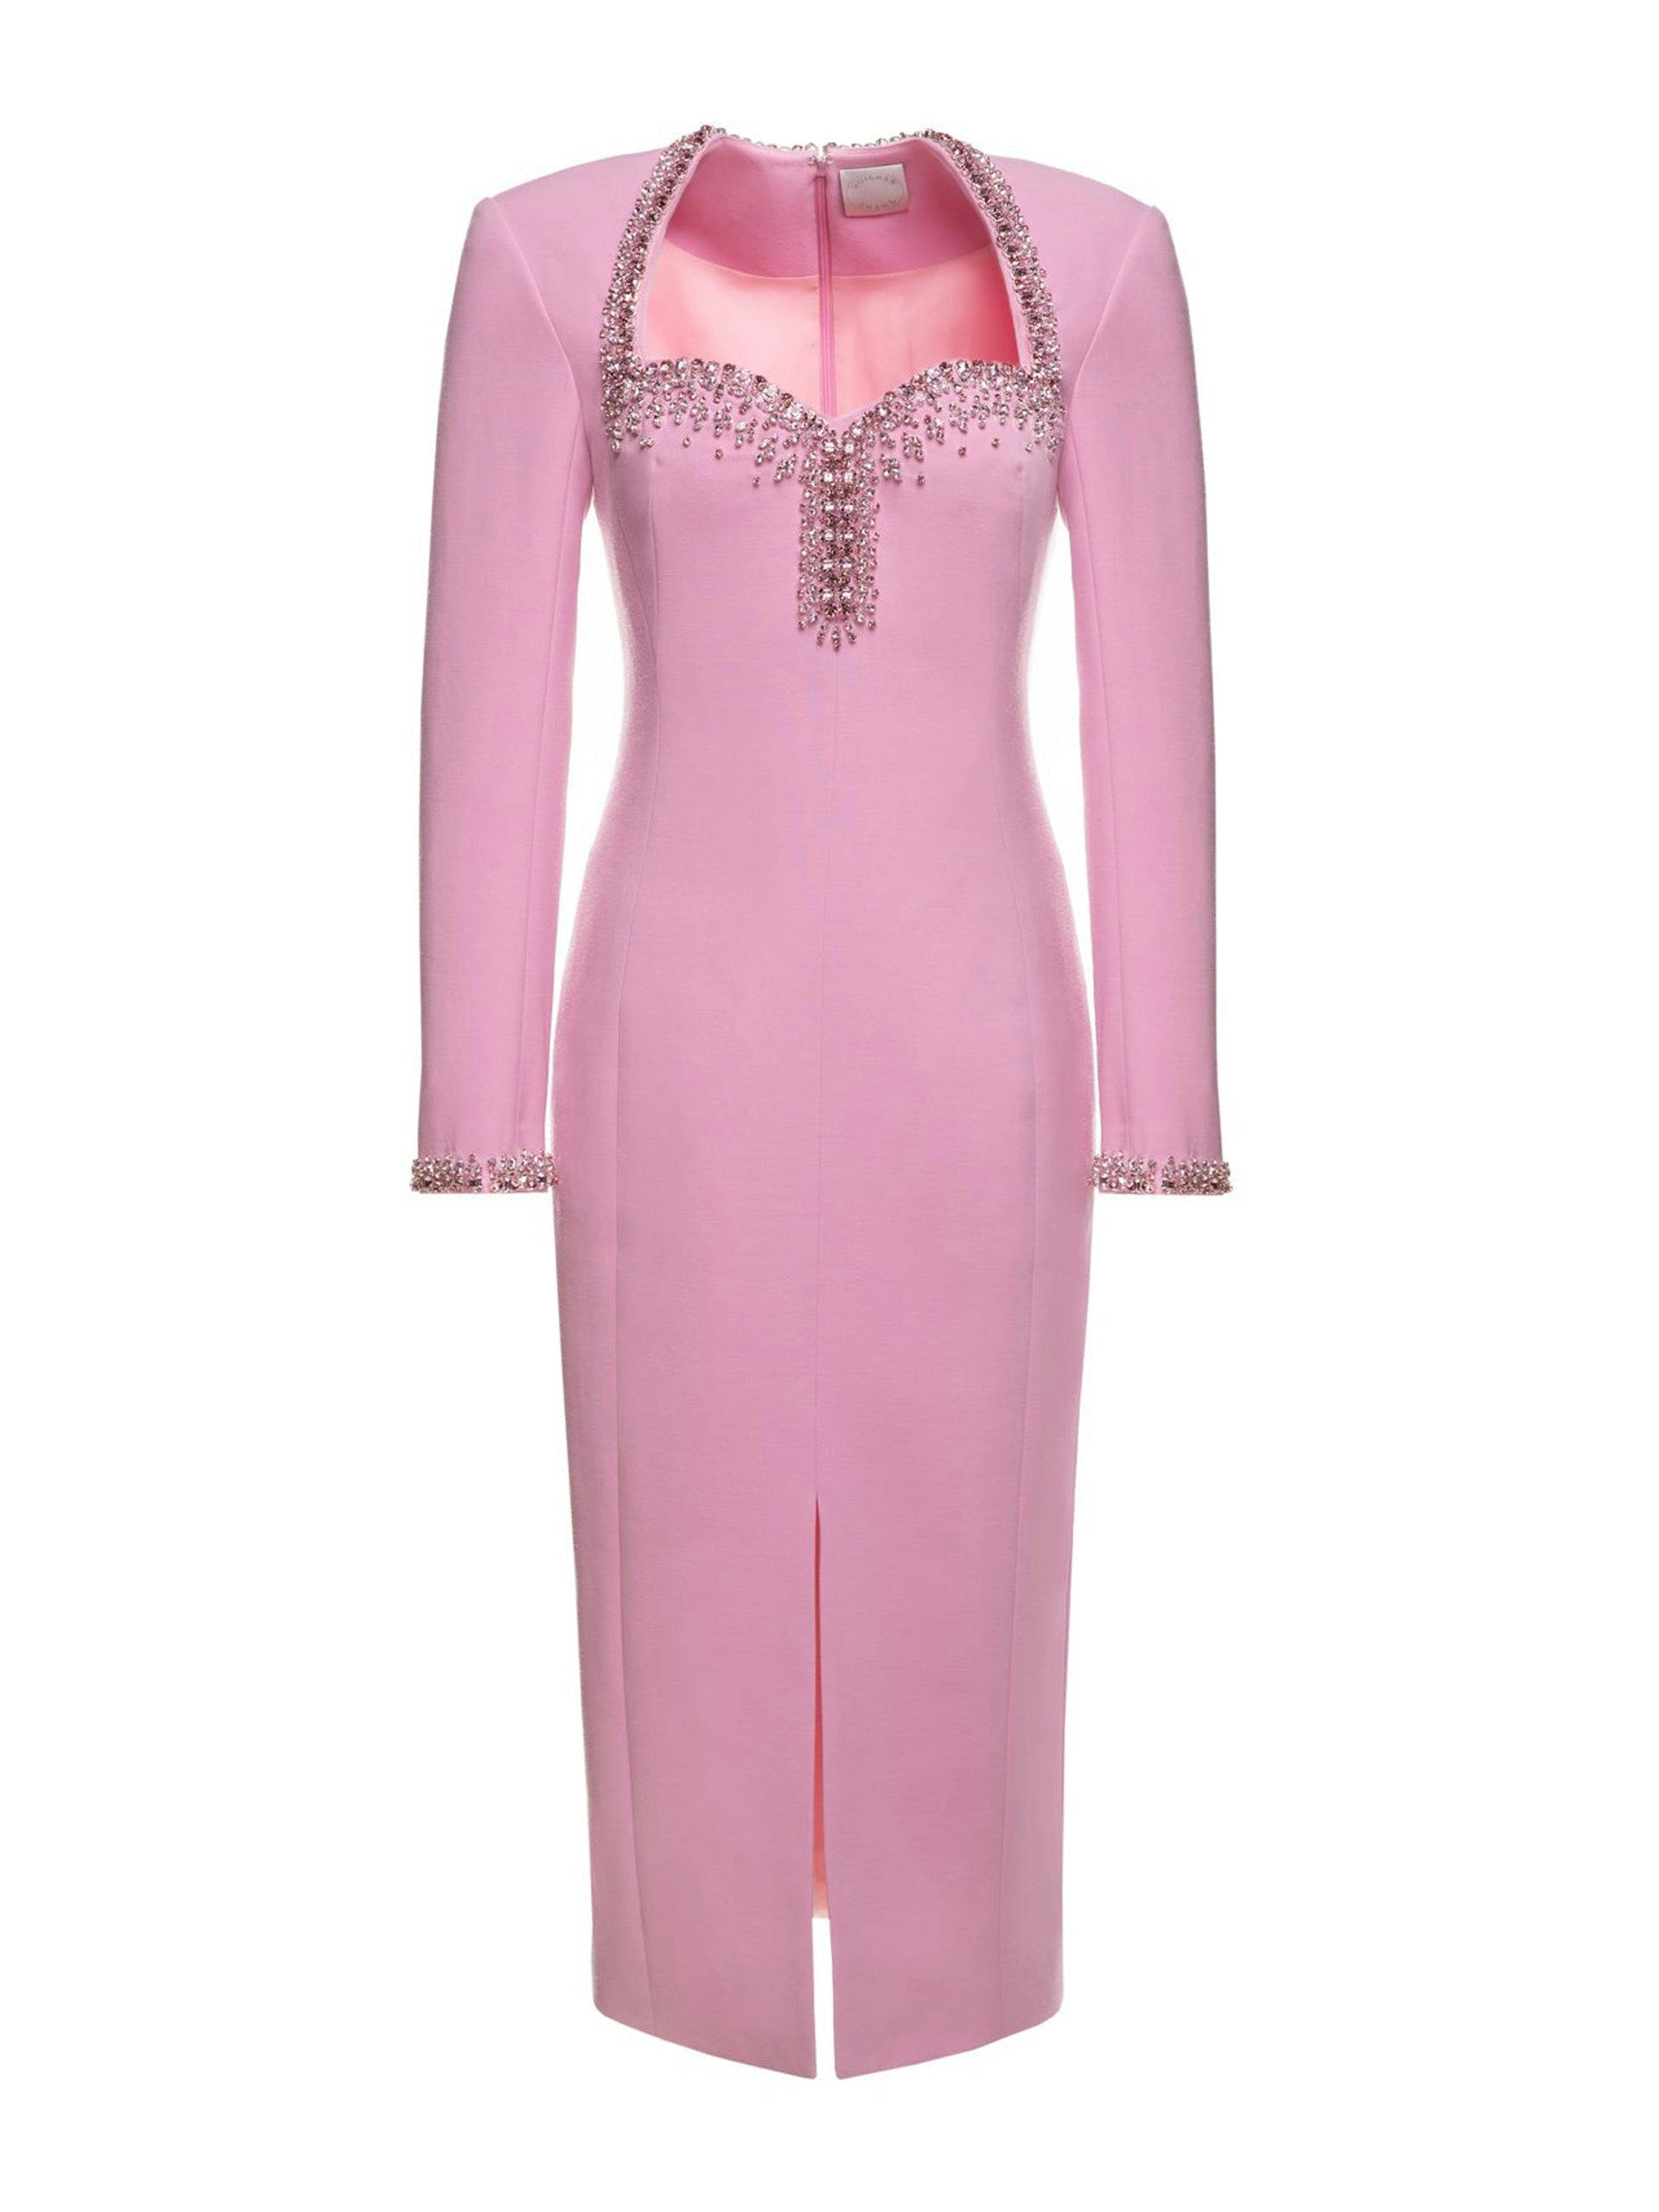 Eleanor orchid pink crepe dress